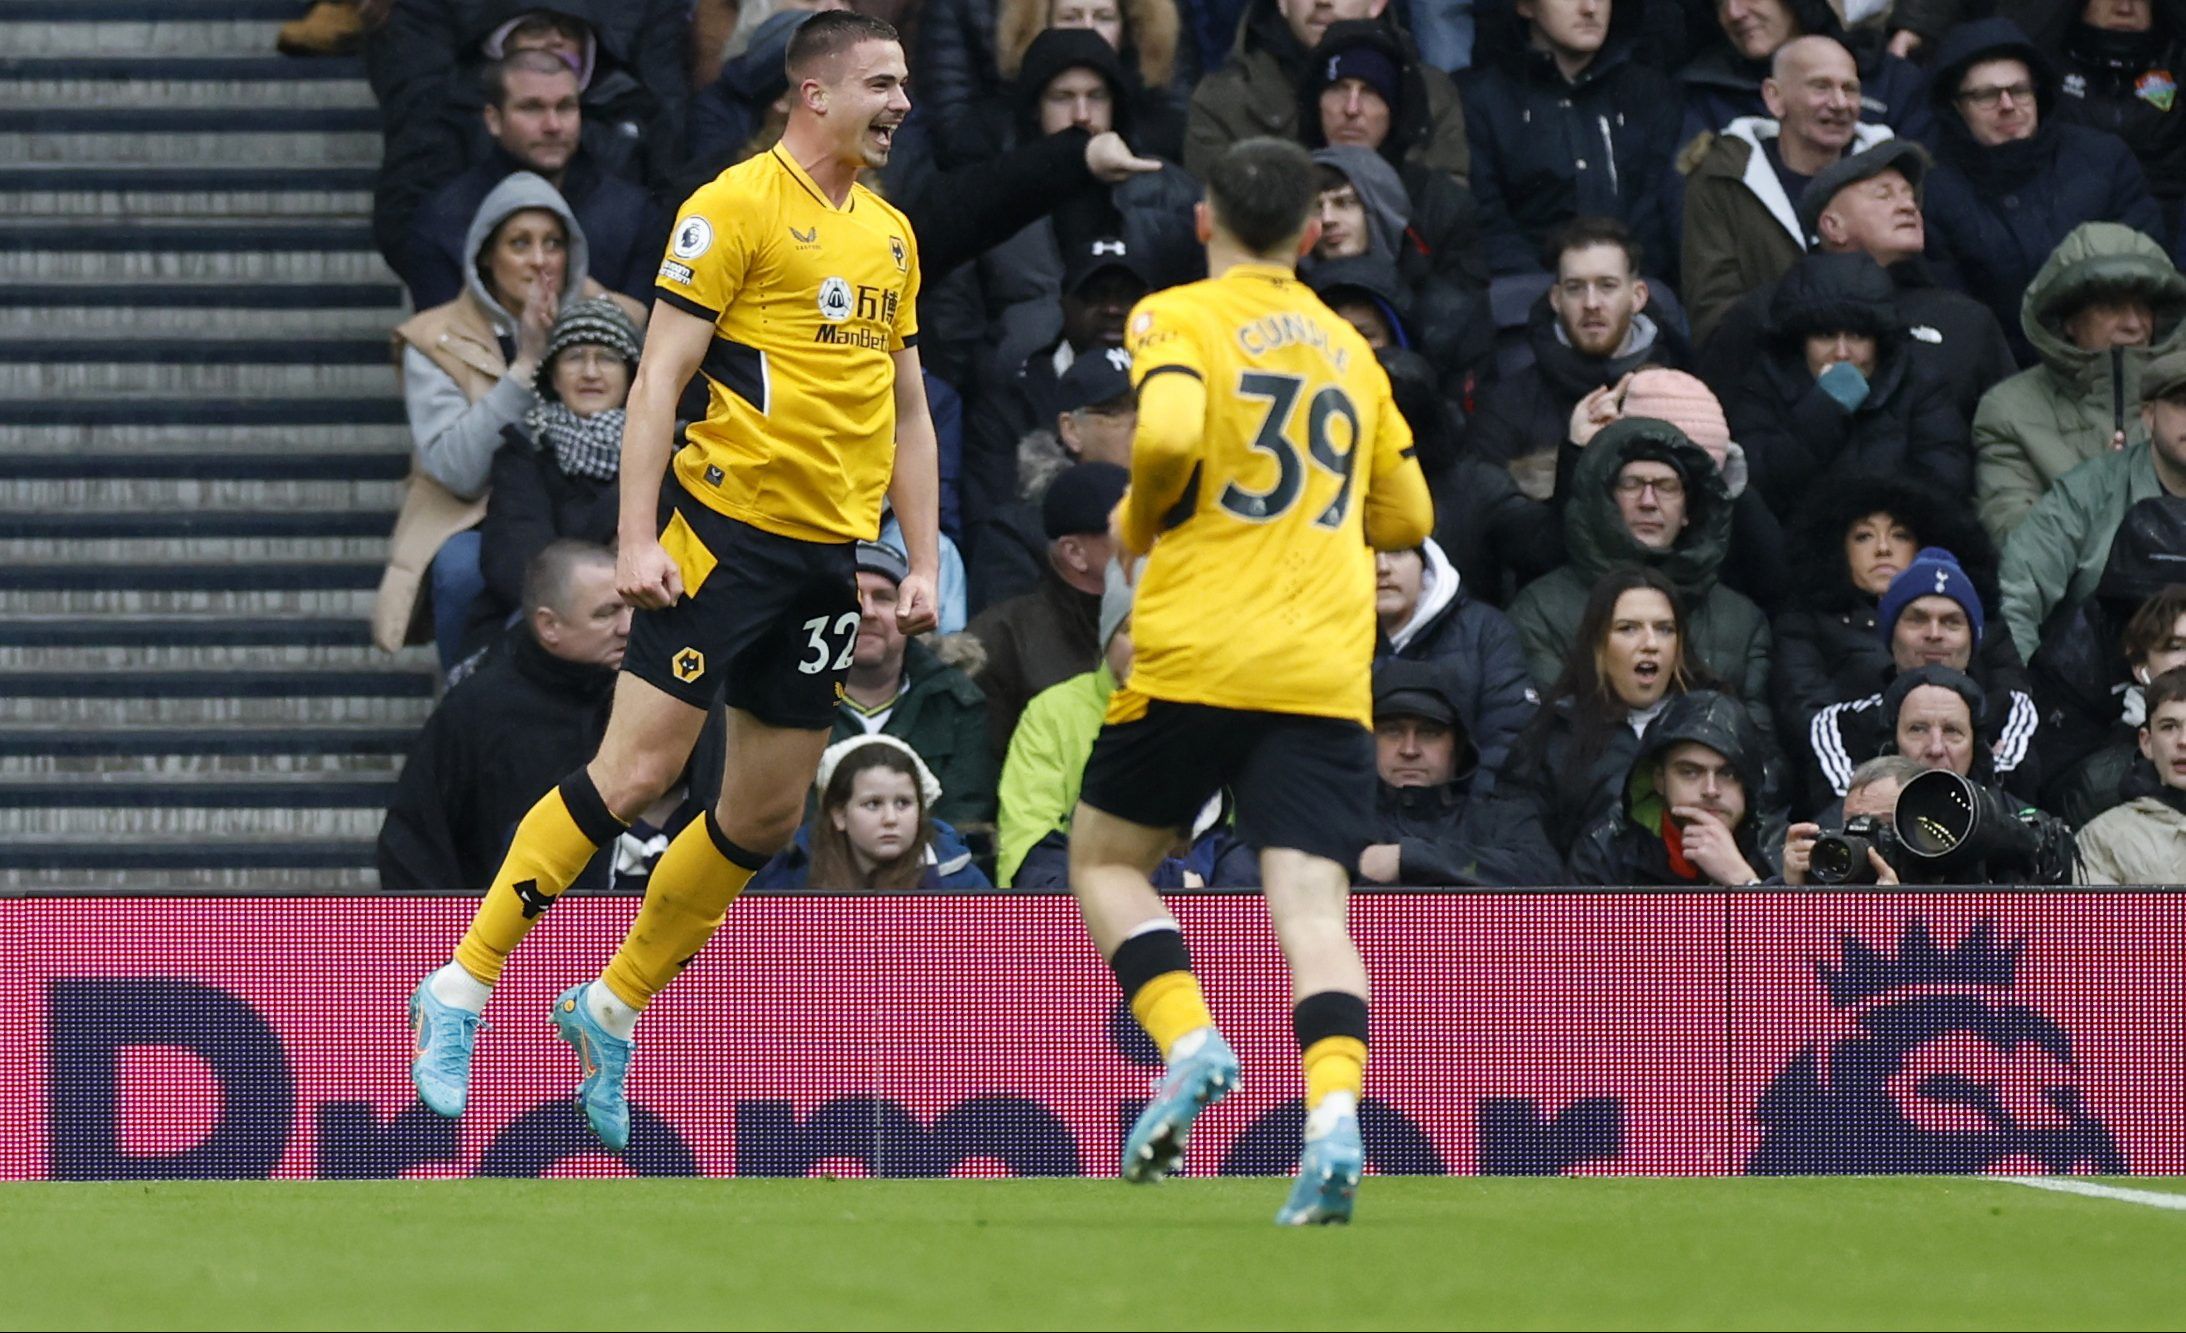 Wolverhampton Wanderers' Leander Dendoncker celebrates scoring their second goal with Luke CundleSoccer Football - Premier League - Tottenham Hotspur v Wolverhampton Wanderers - Tottenham Hotspur Stadium, London, Britain - February 13, 2022 Wolverhampton Wanderers' Leander Dendoncker celebrates scoring their second goal with Luke Cundle Action Images via Reuters/Peter Cziborra EDITORIAL USE ONLY. No use with unauthorized audio, video, data, fixture lists, club/league logos or 'live' services. On